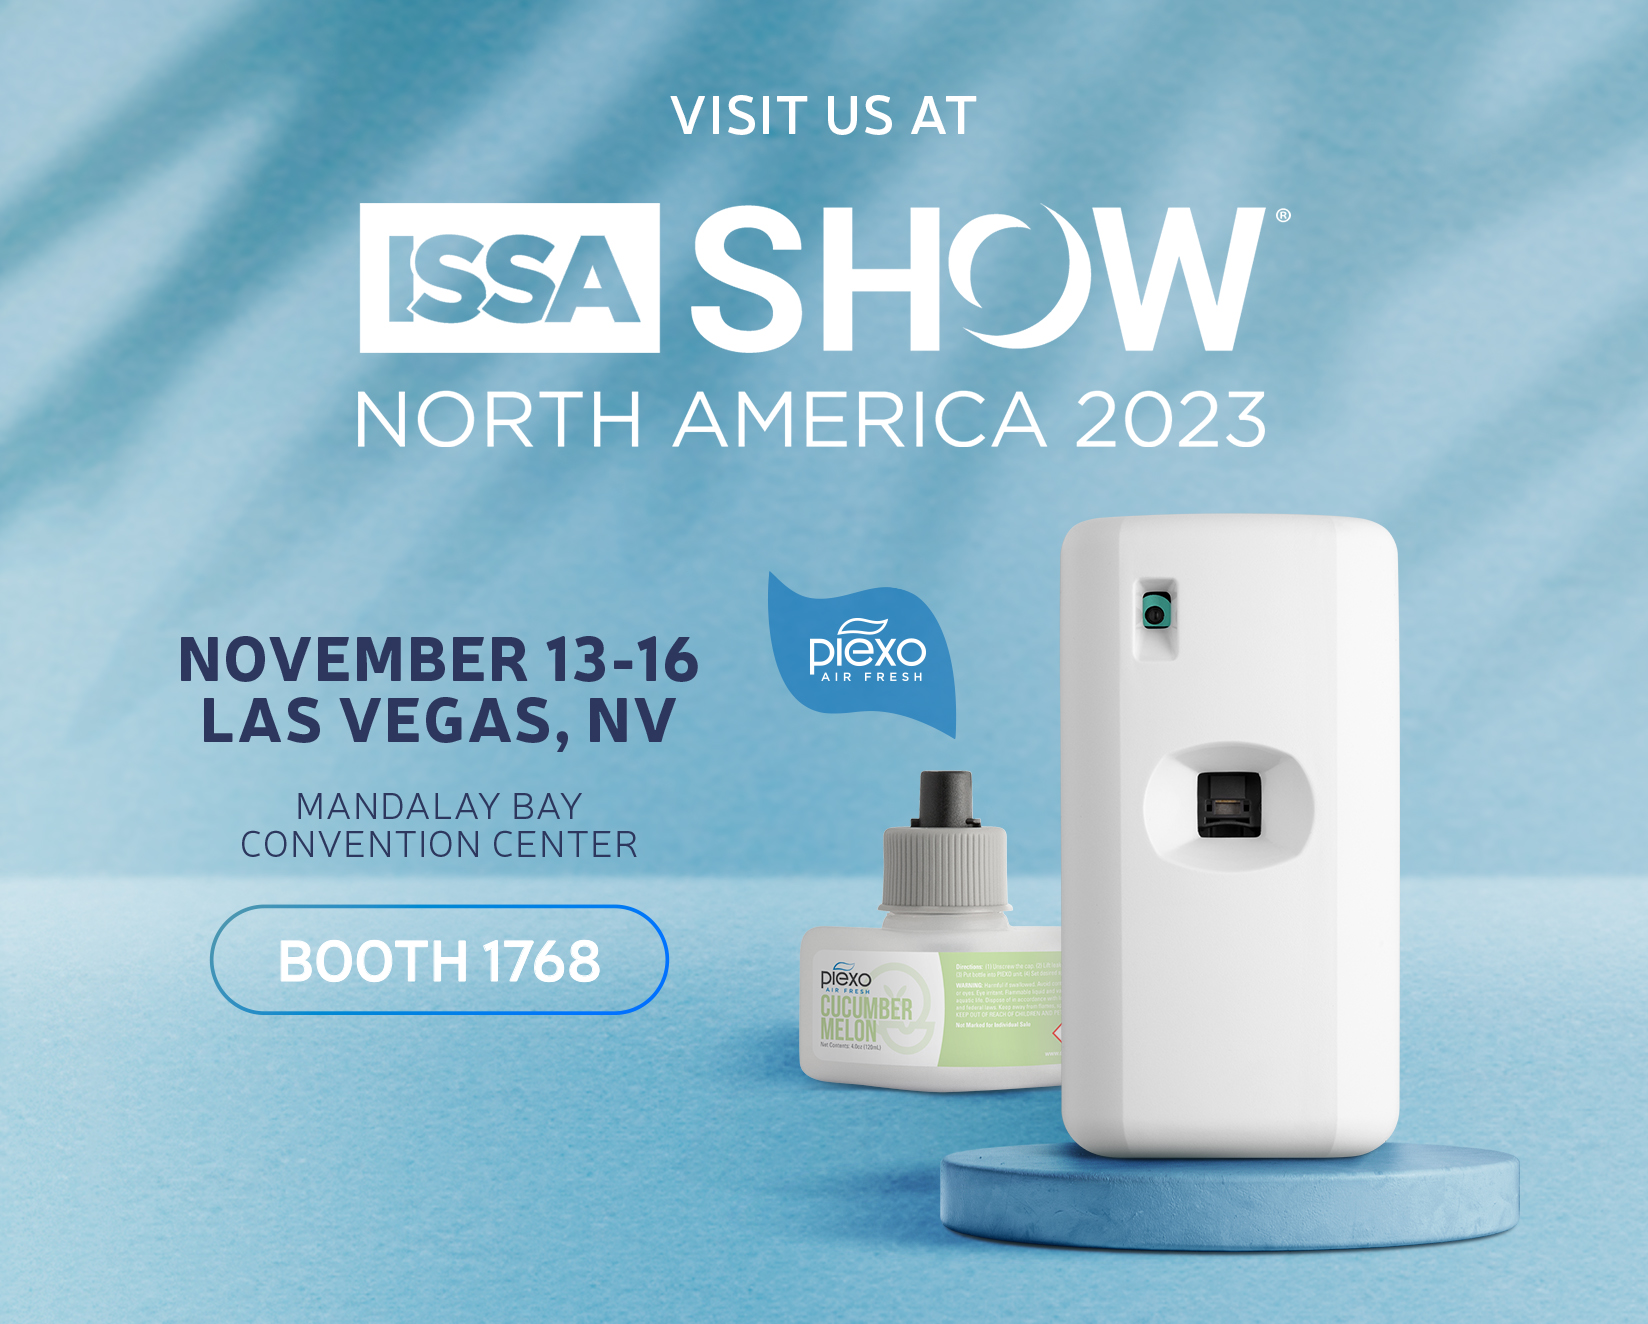 See you at ISSA Show 2023!